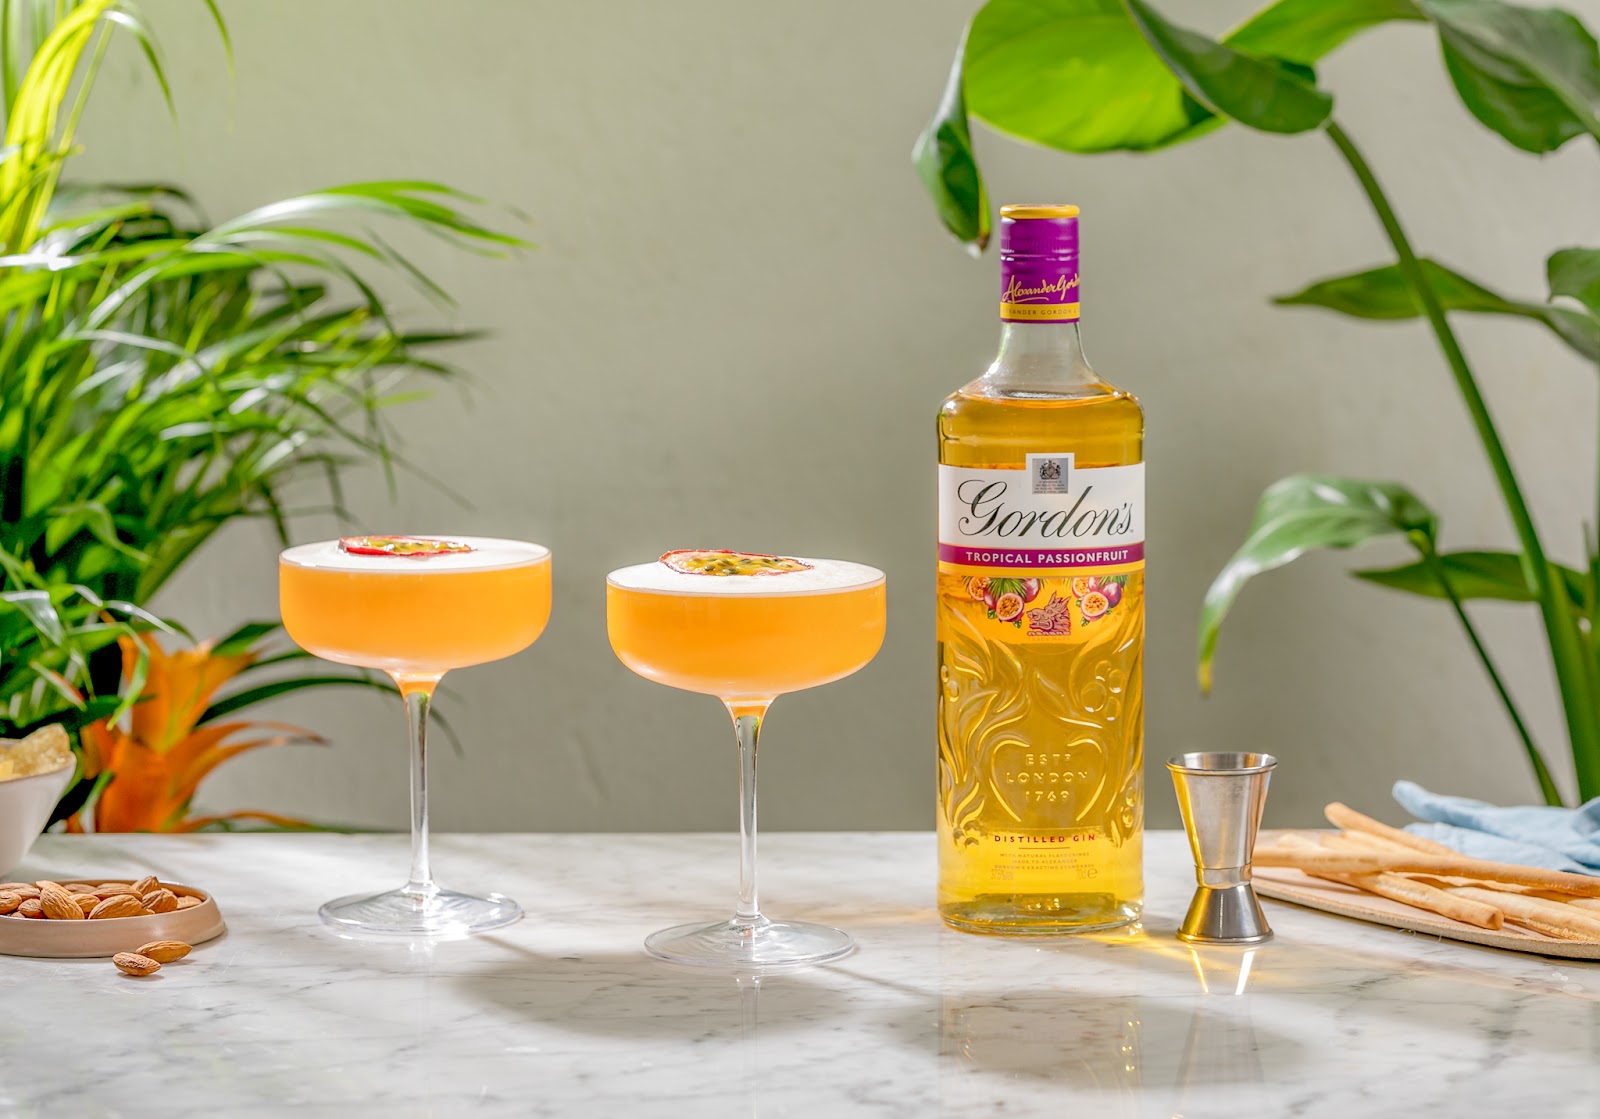 Gordon's Tropical Passionfruit Gin Cocktail Recipes You Don't Want To Miss